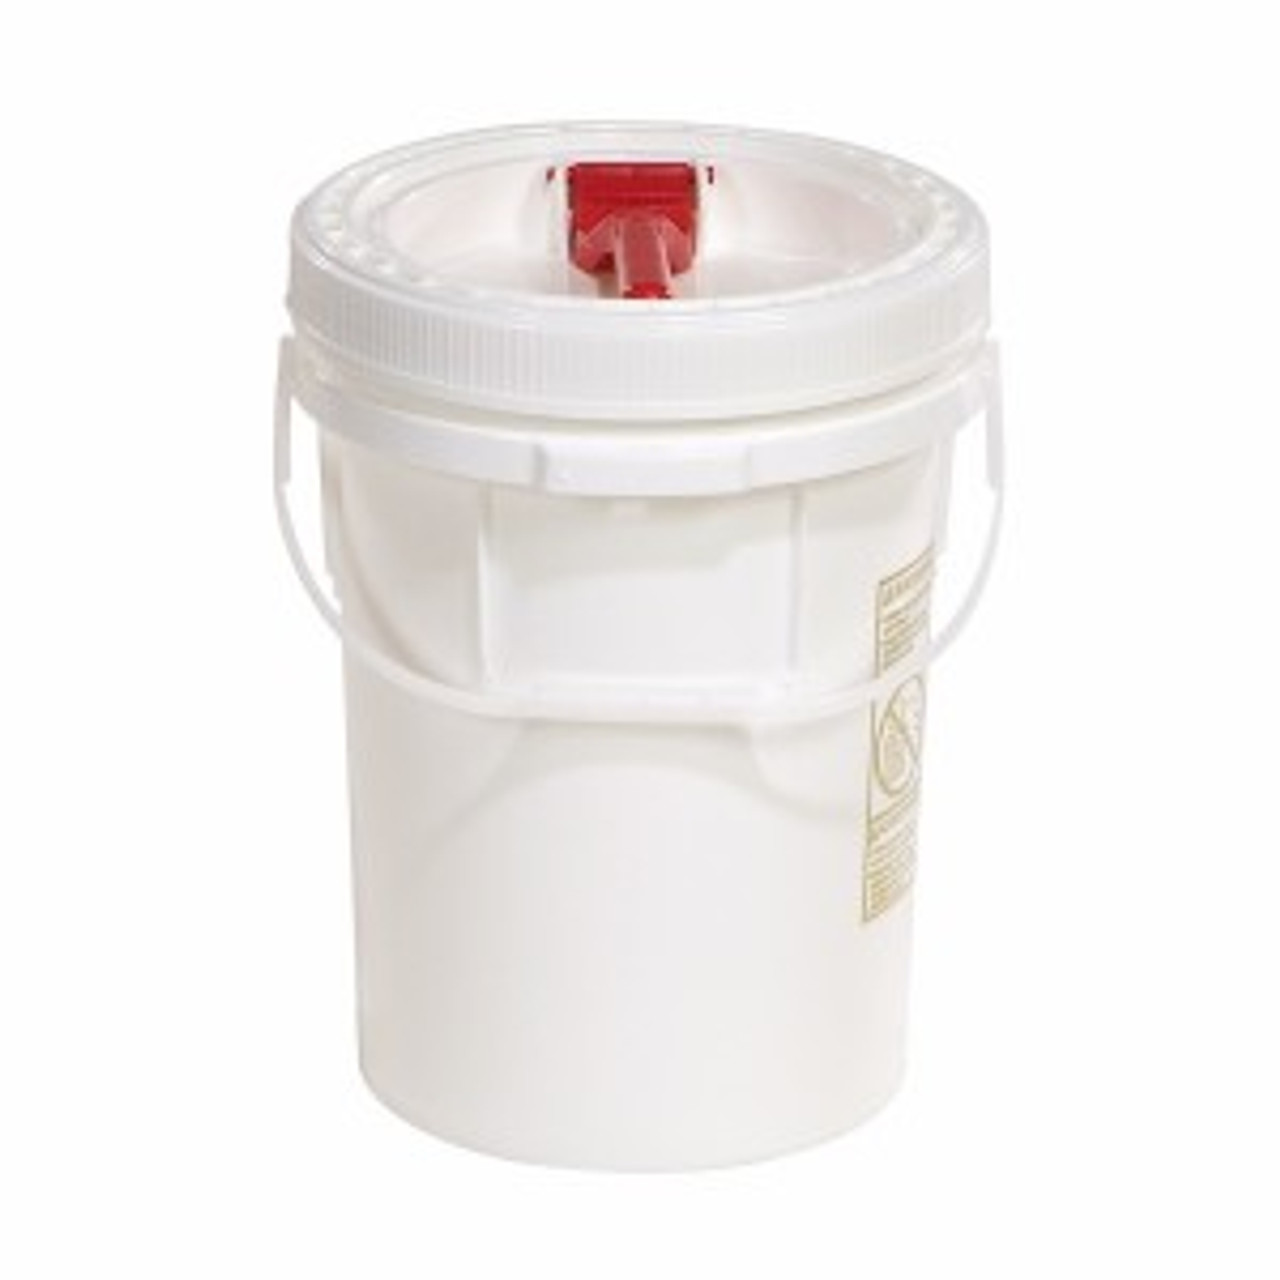 5-Gallon Bucket with Lid